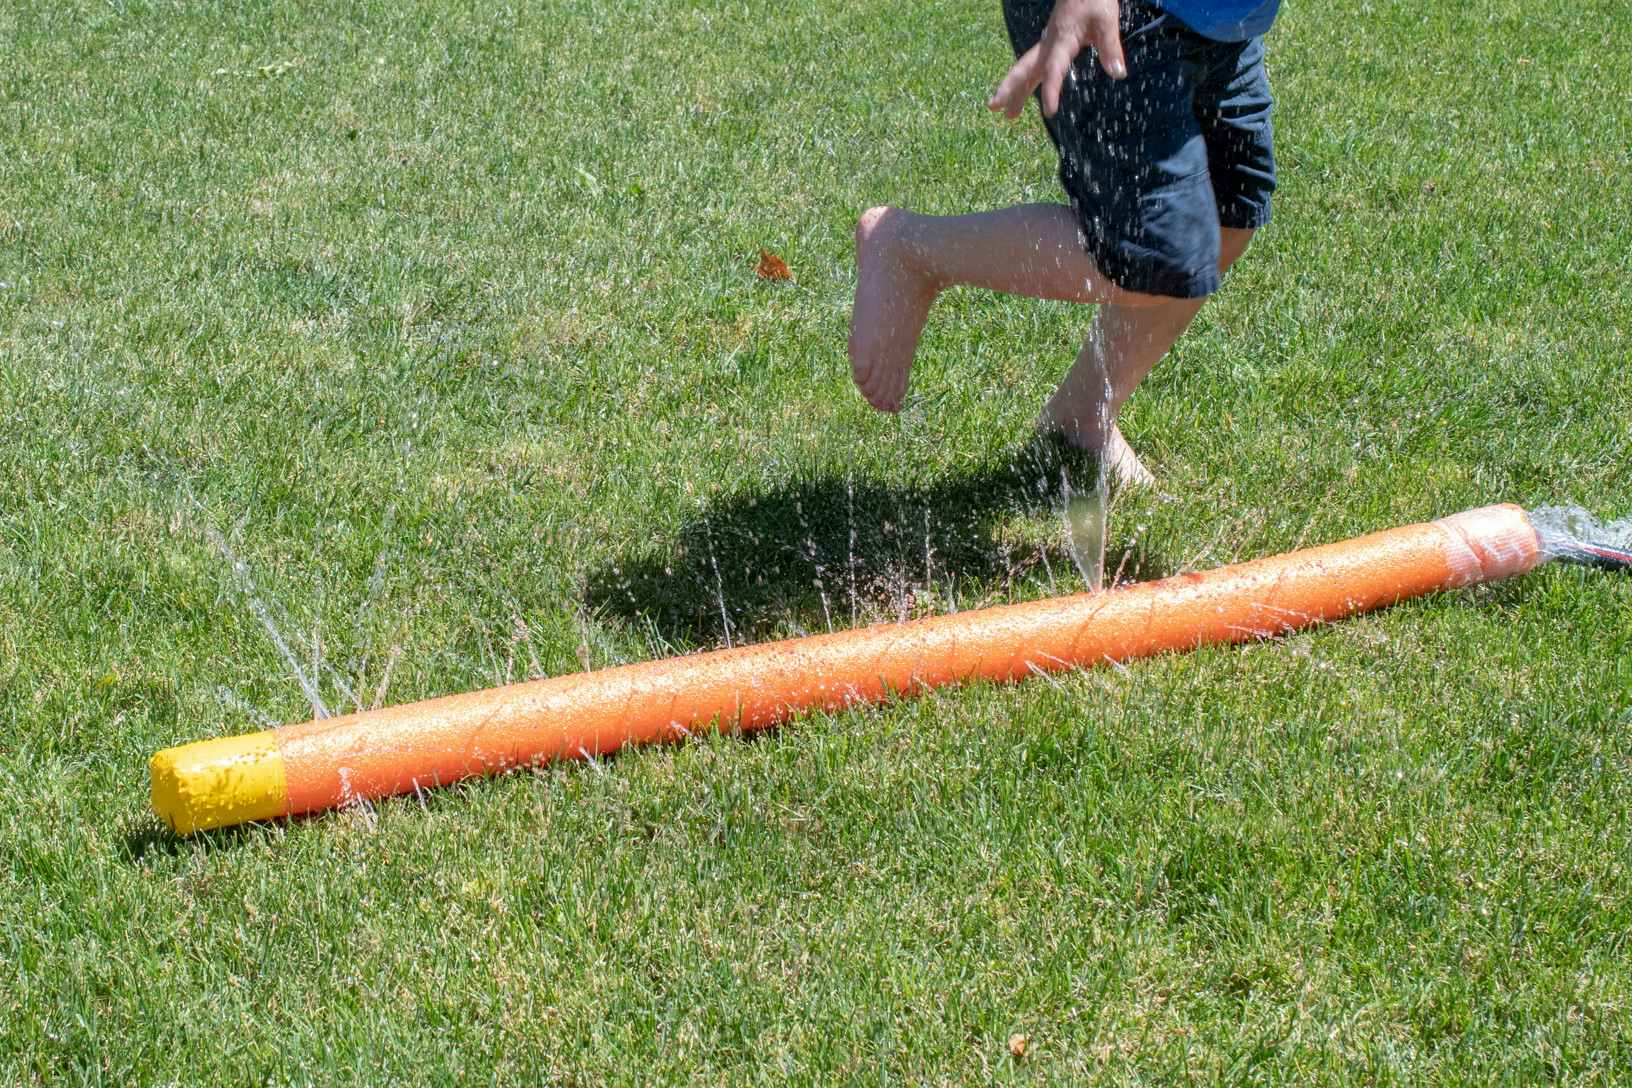 A child playing around a DIY pool noodle sprinkler that is attached to a hose on a lawn.